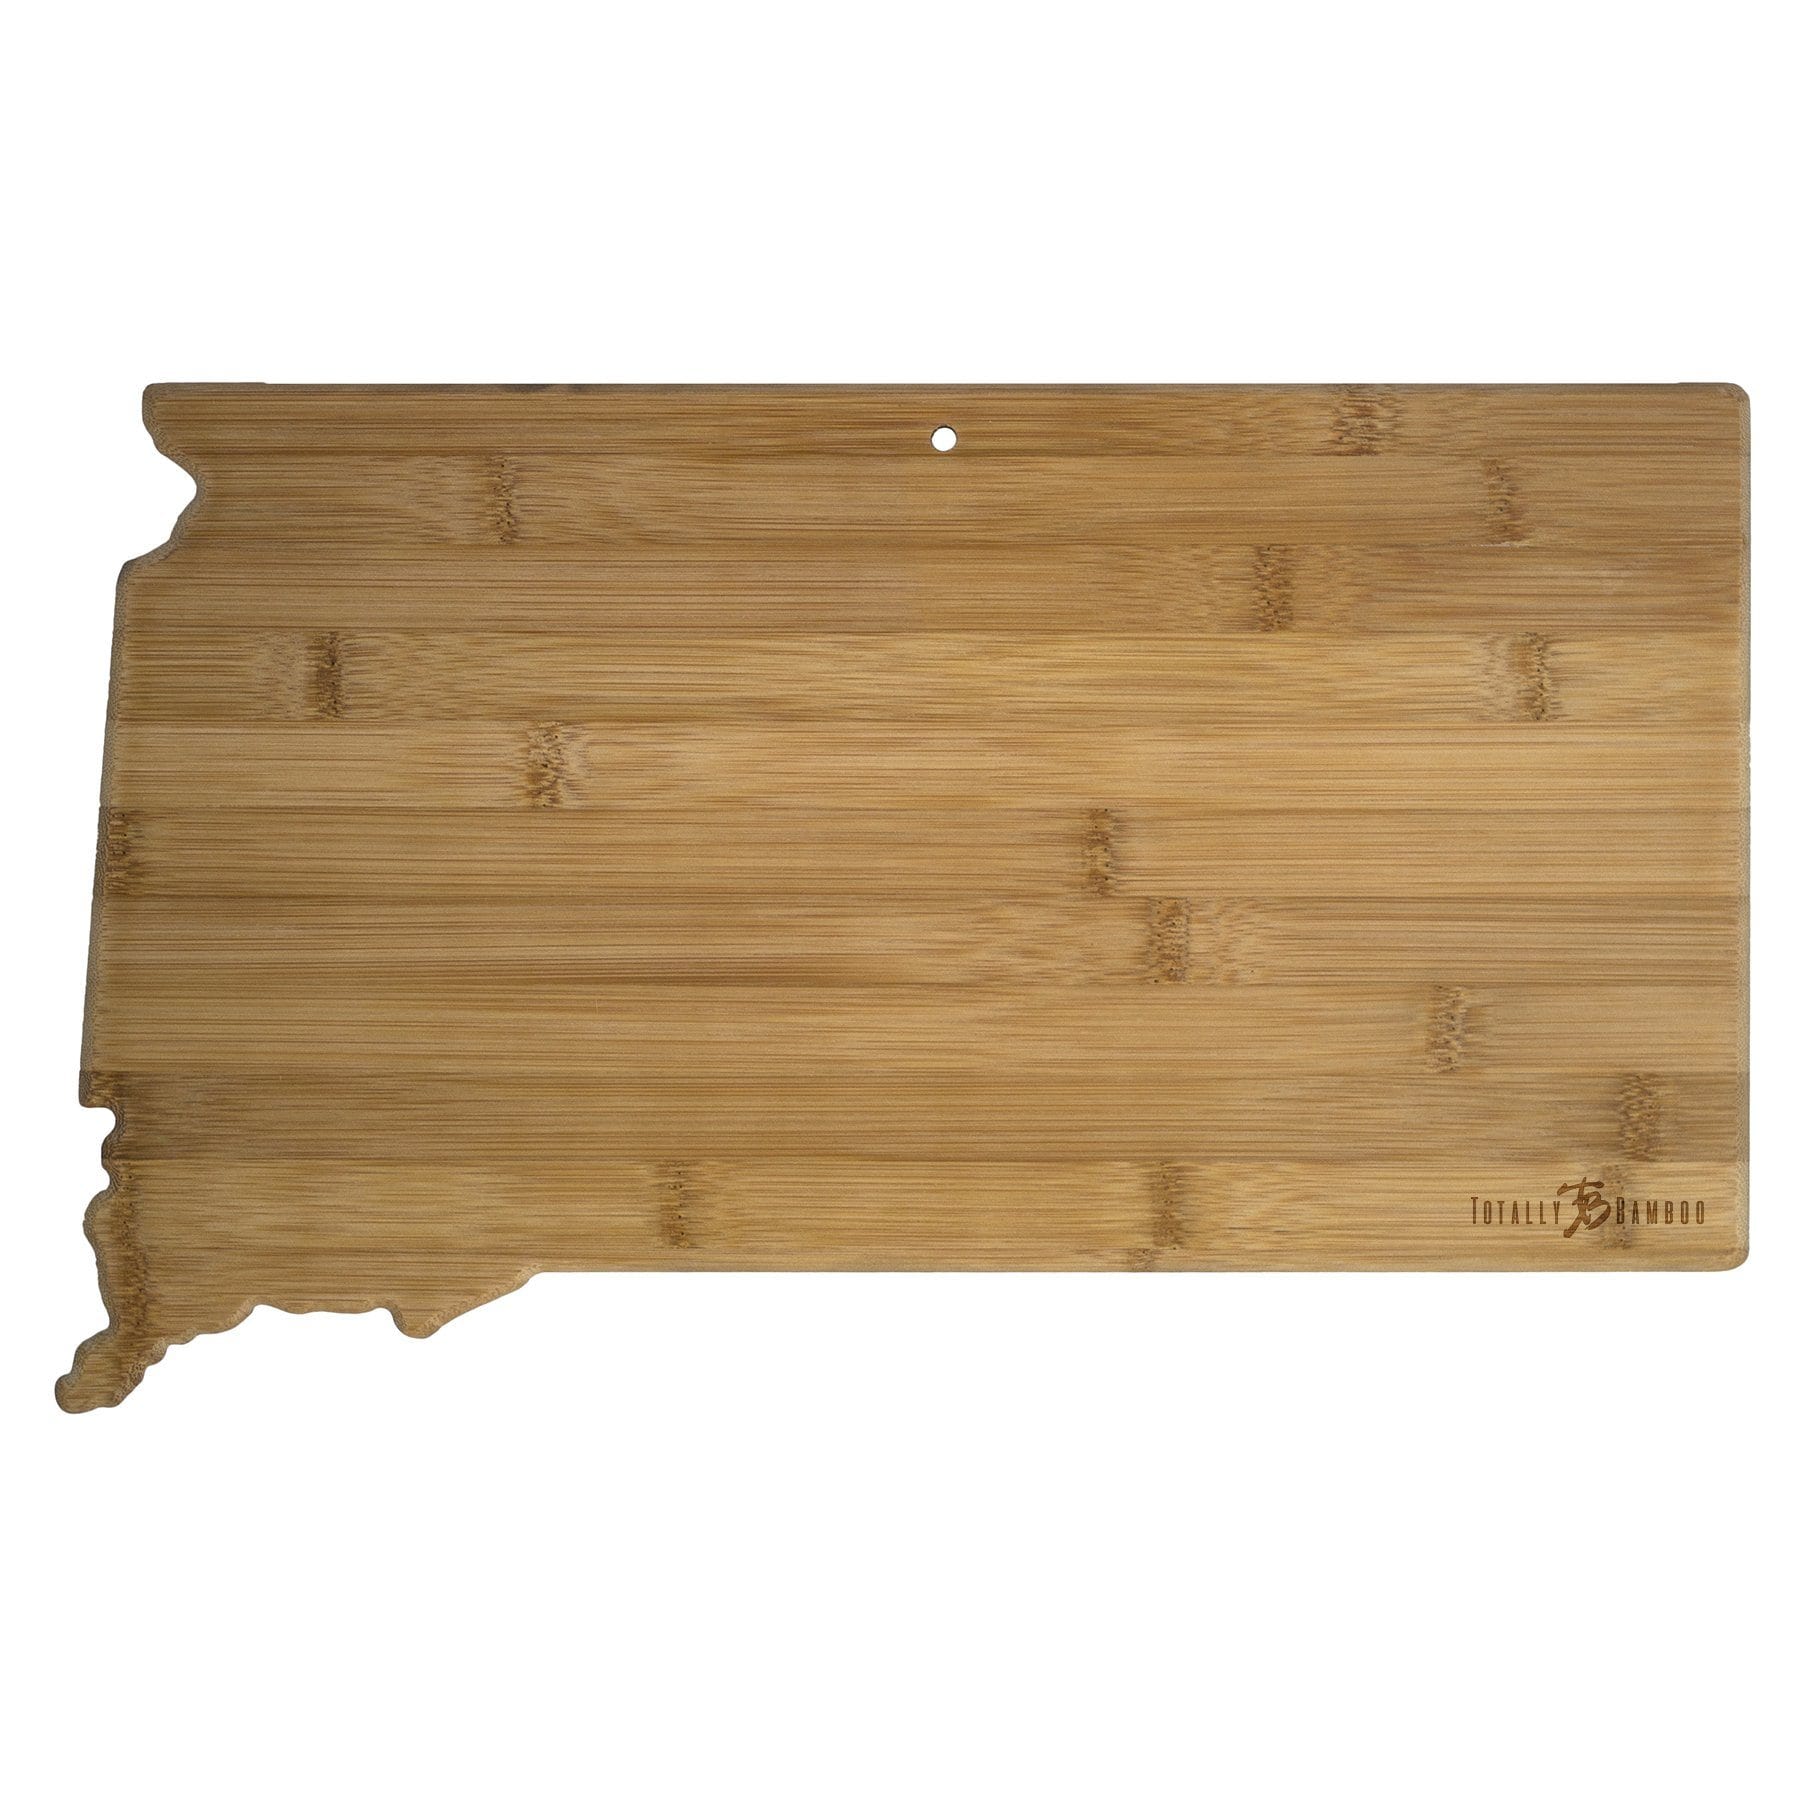 Totally Bamboo South Dakota State Shaped Bamboo Serving and Cutting Board